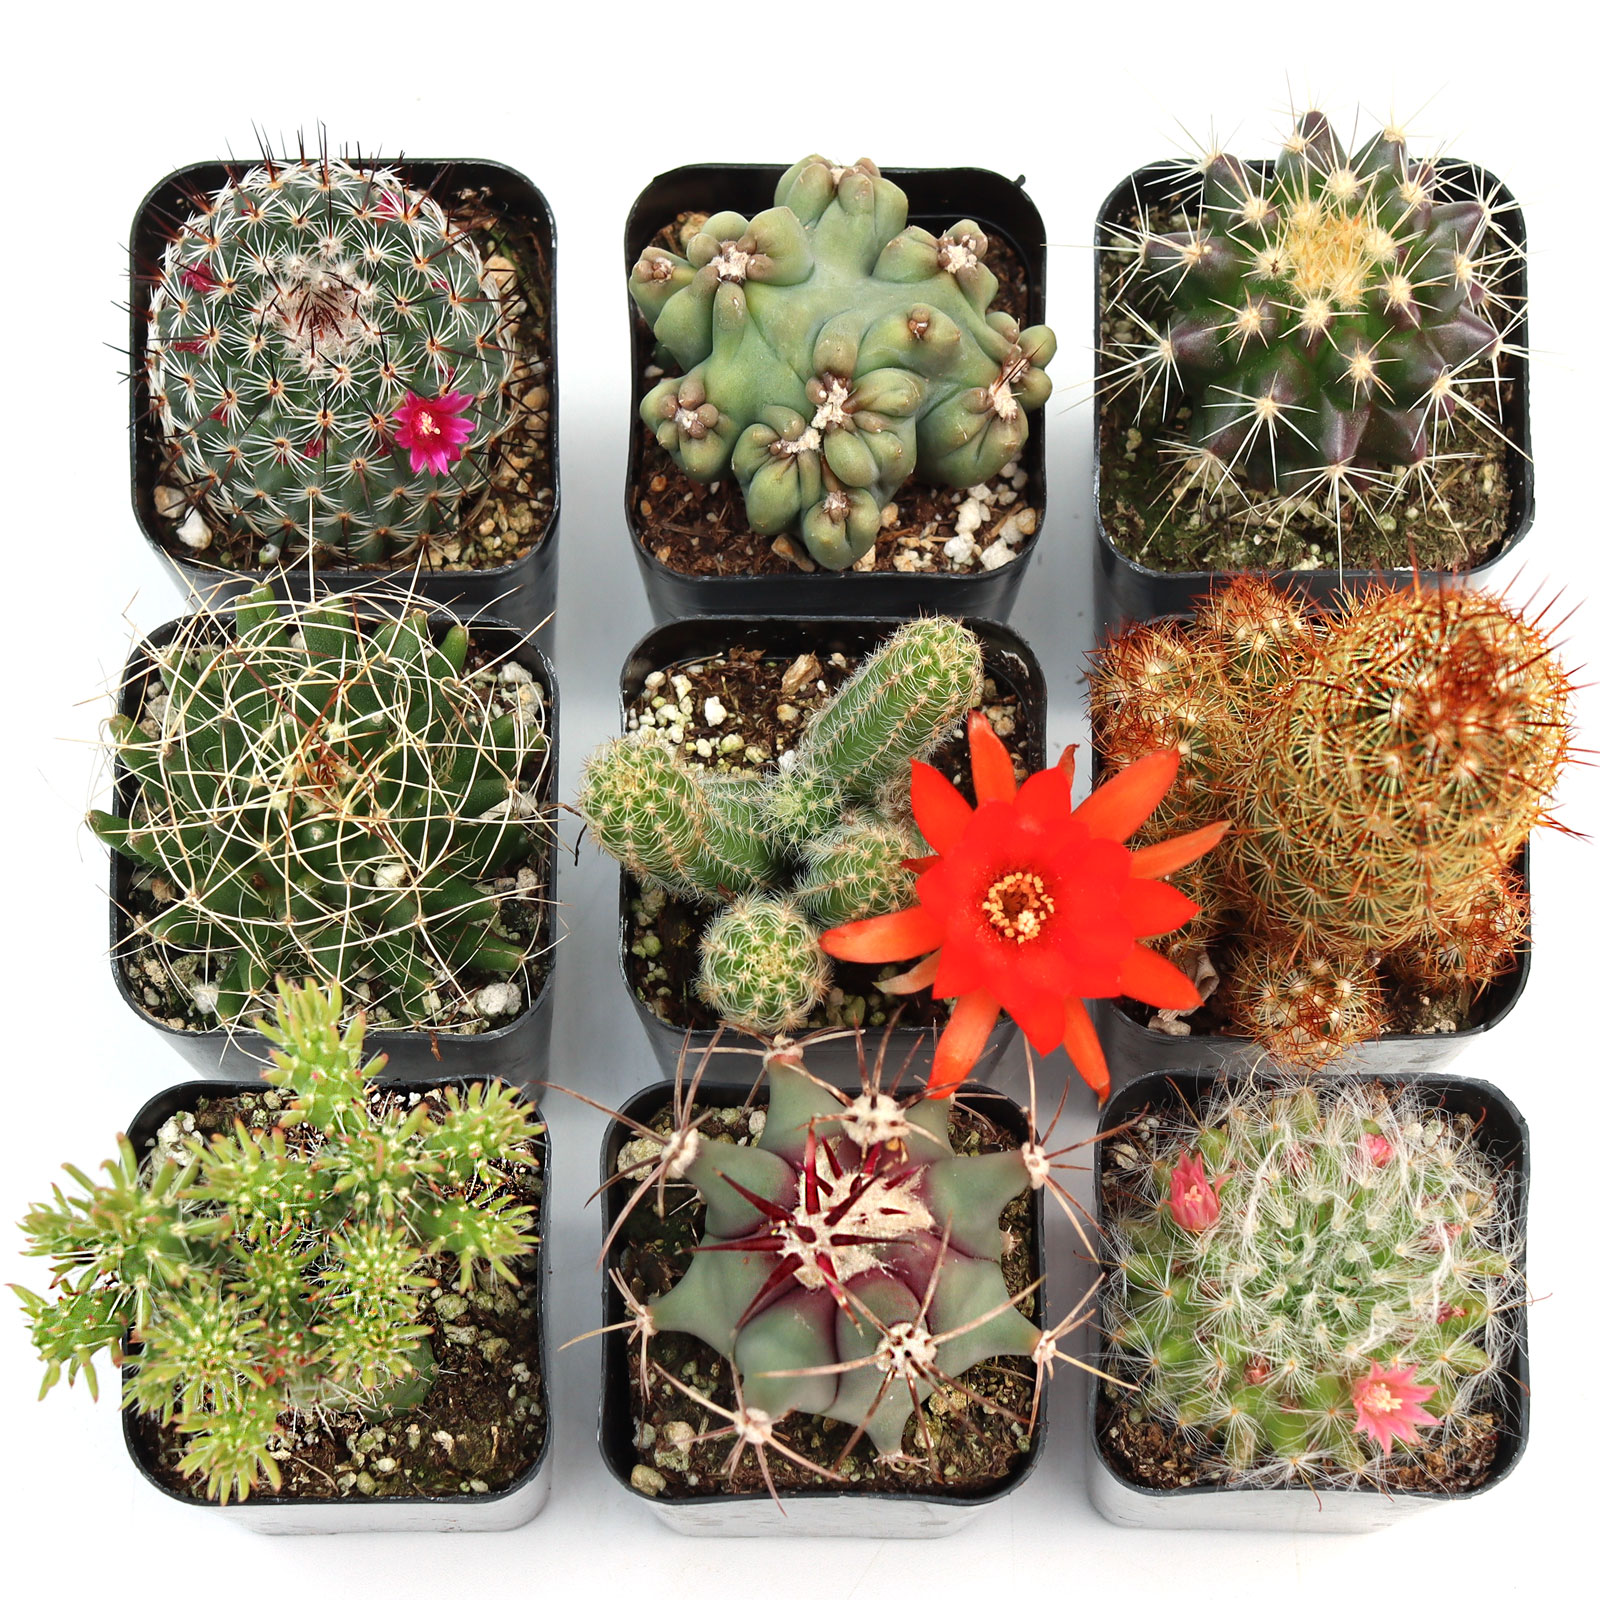 If I buy a "set", will each plant be labeled with the name of the plant?